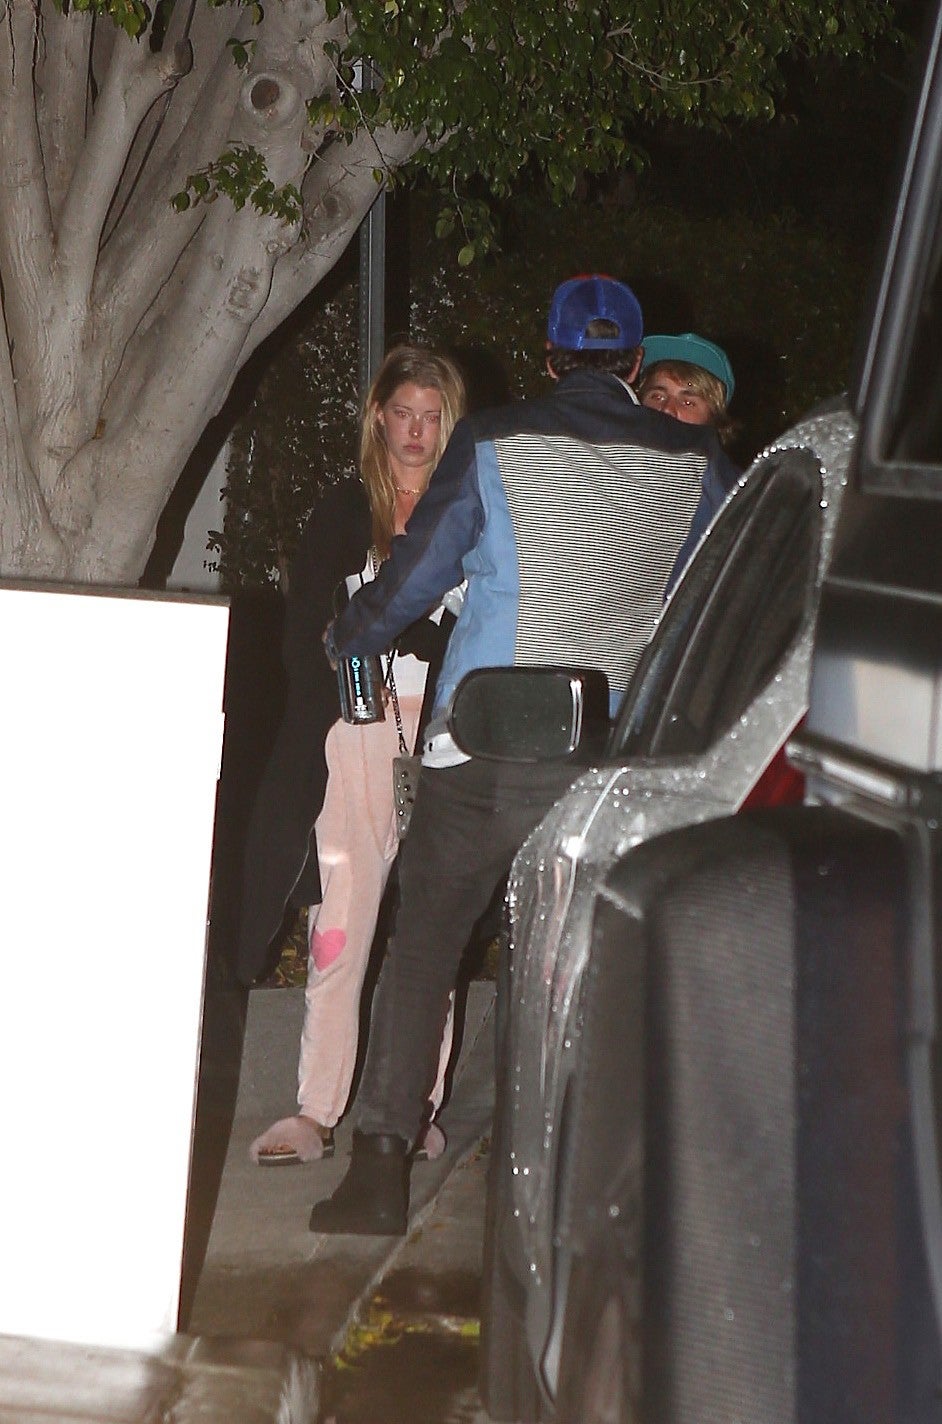 Baskin Champion and Justin Bieber head to his home after attending a Craig David concert.